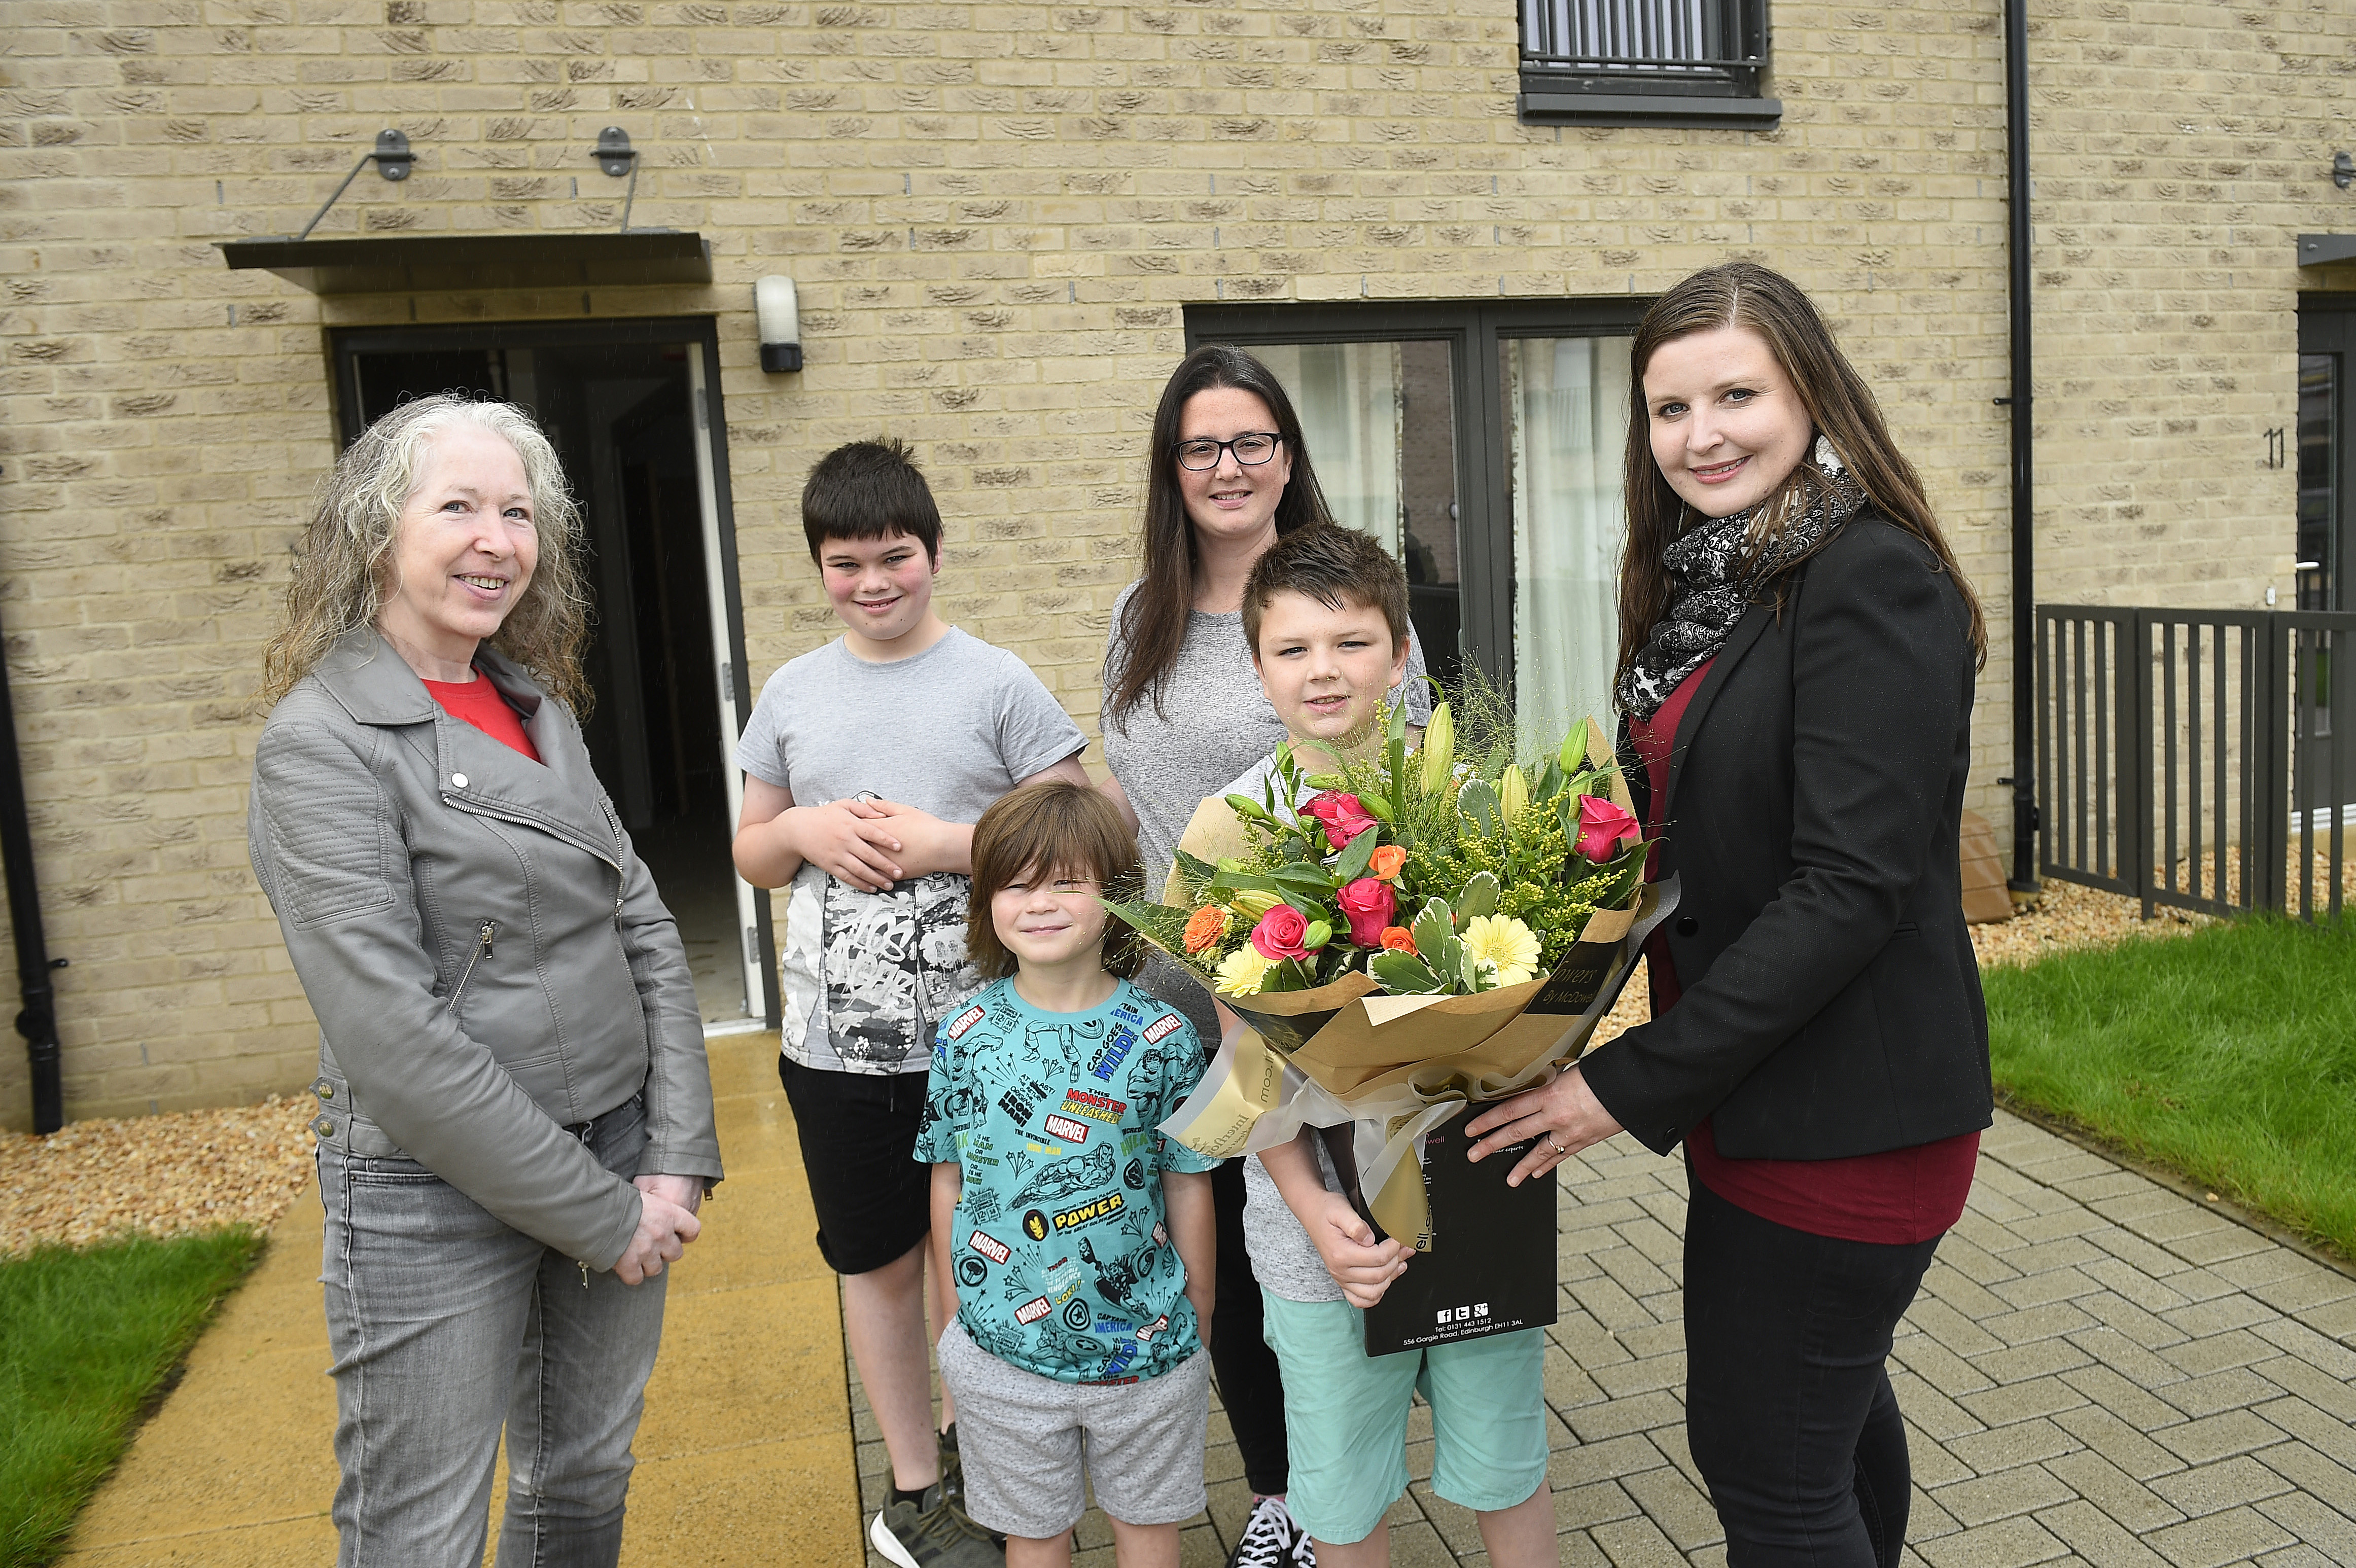 Family moves in to ‘life-changing’ North Sighthill regeneration project